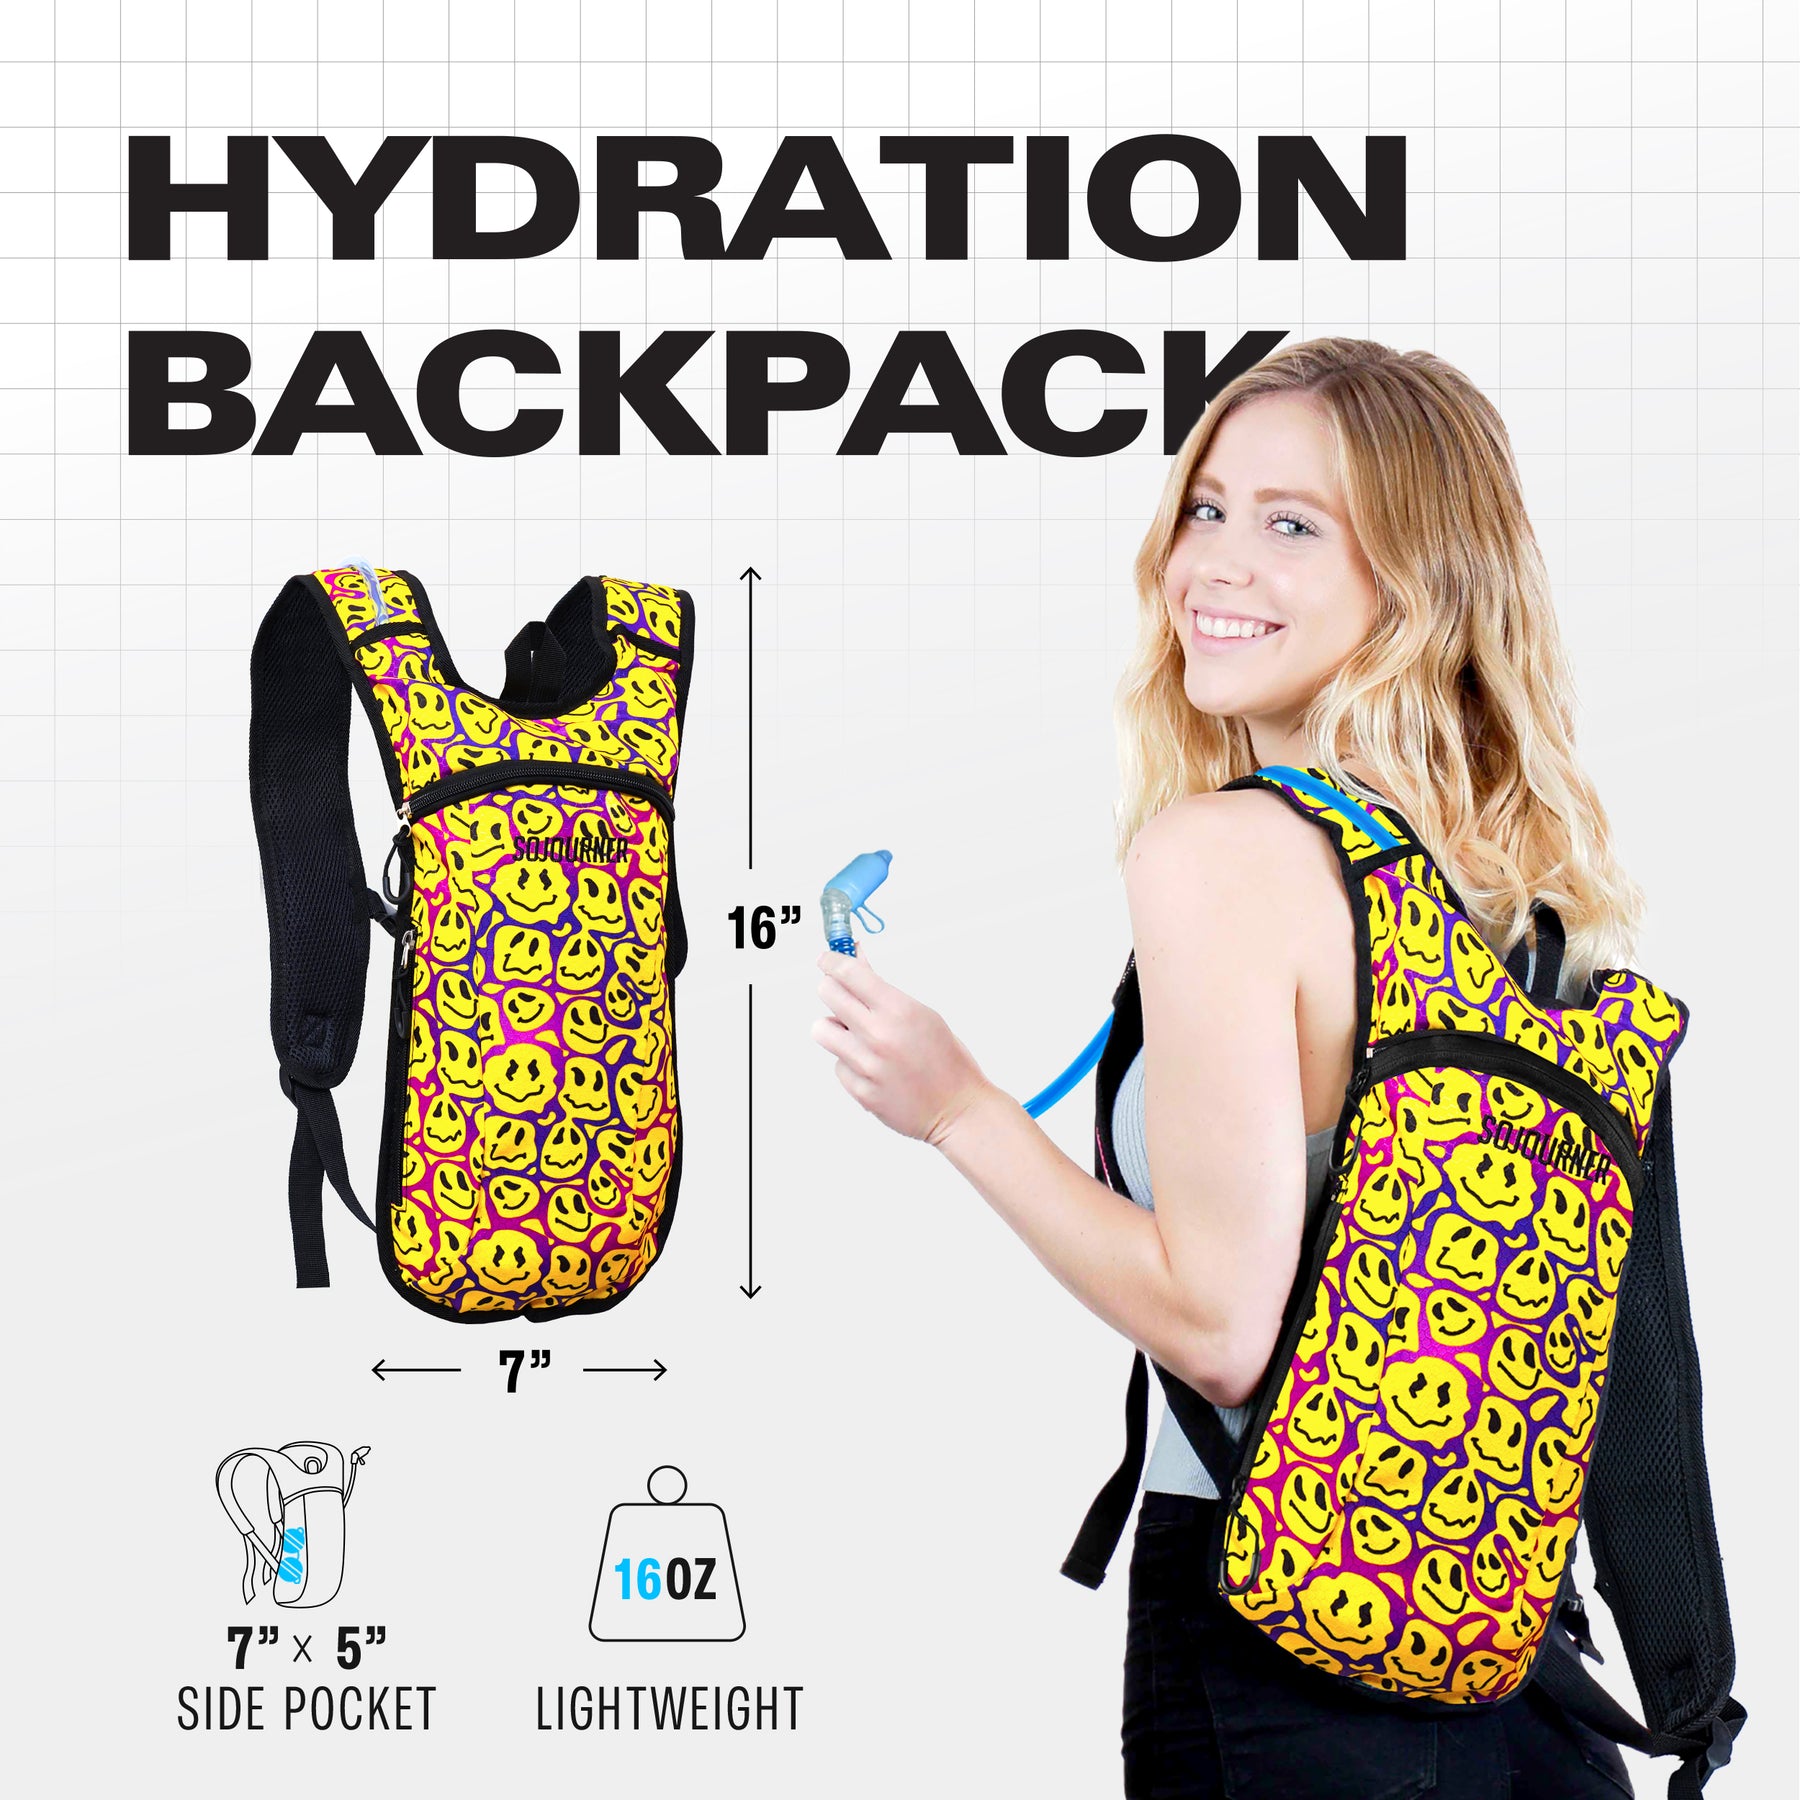 Hydration Pack Backpack - 2L Water Bladder - Smiley Face